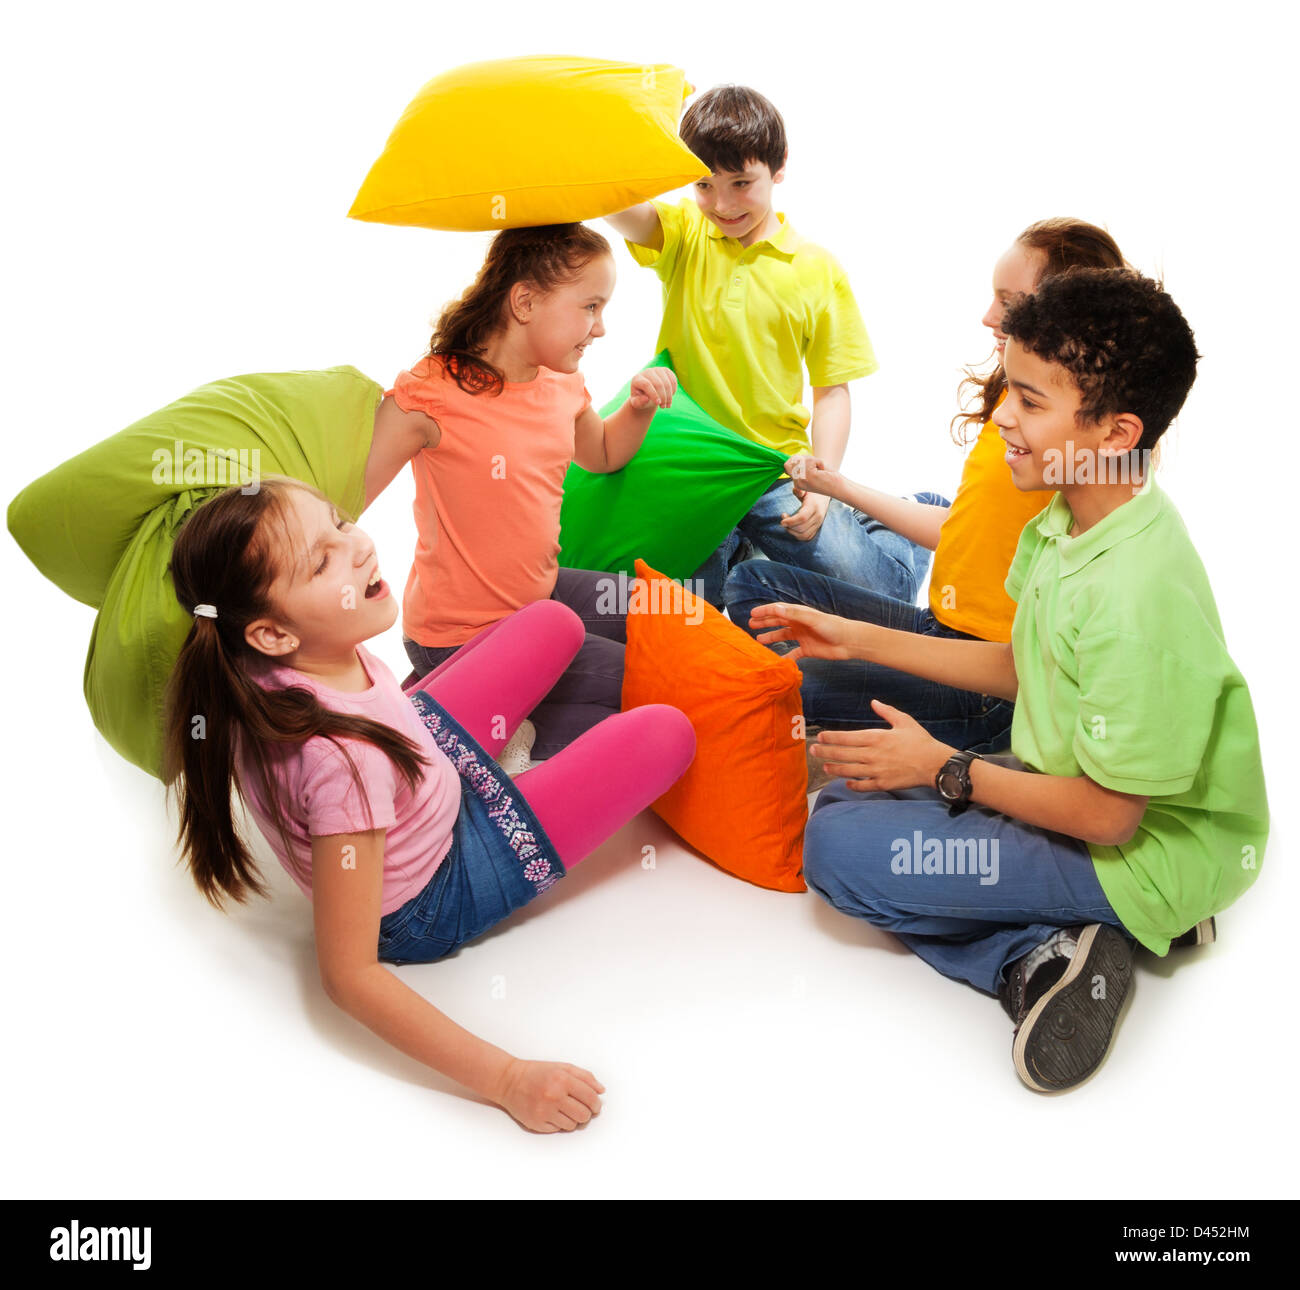 Five teen kids fighting with pillows, laughing and having fun, isolated on white Stock Photo